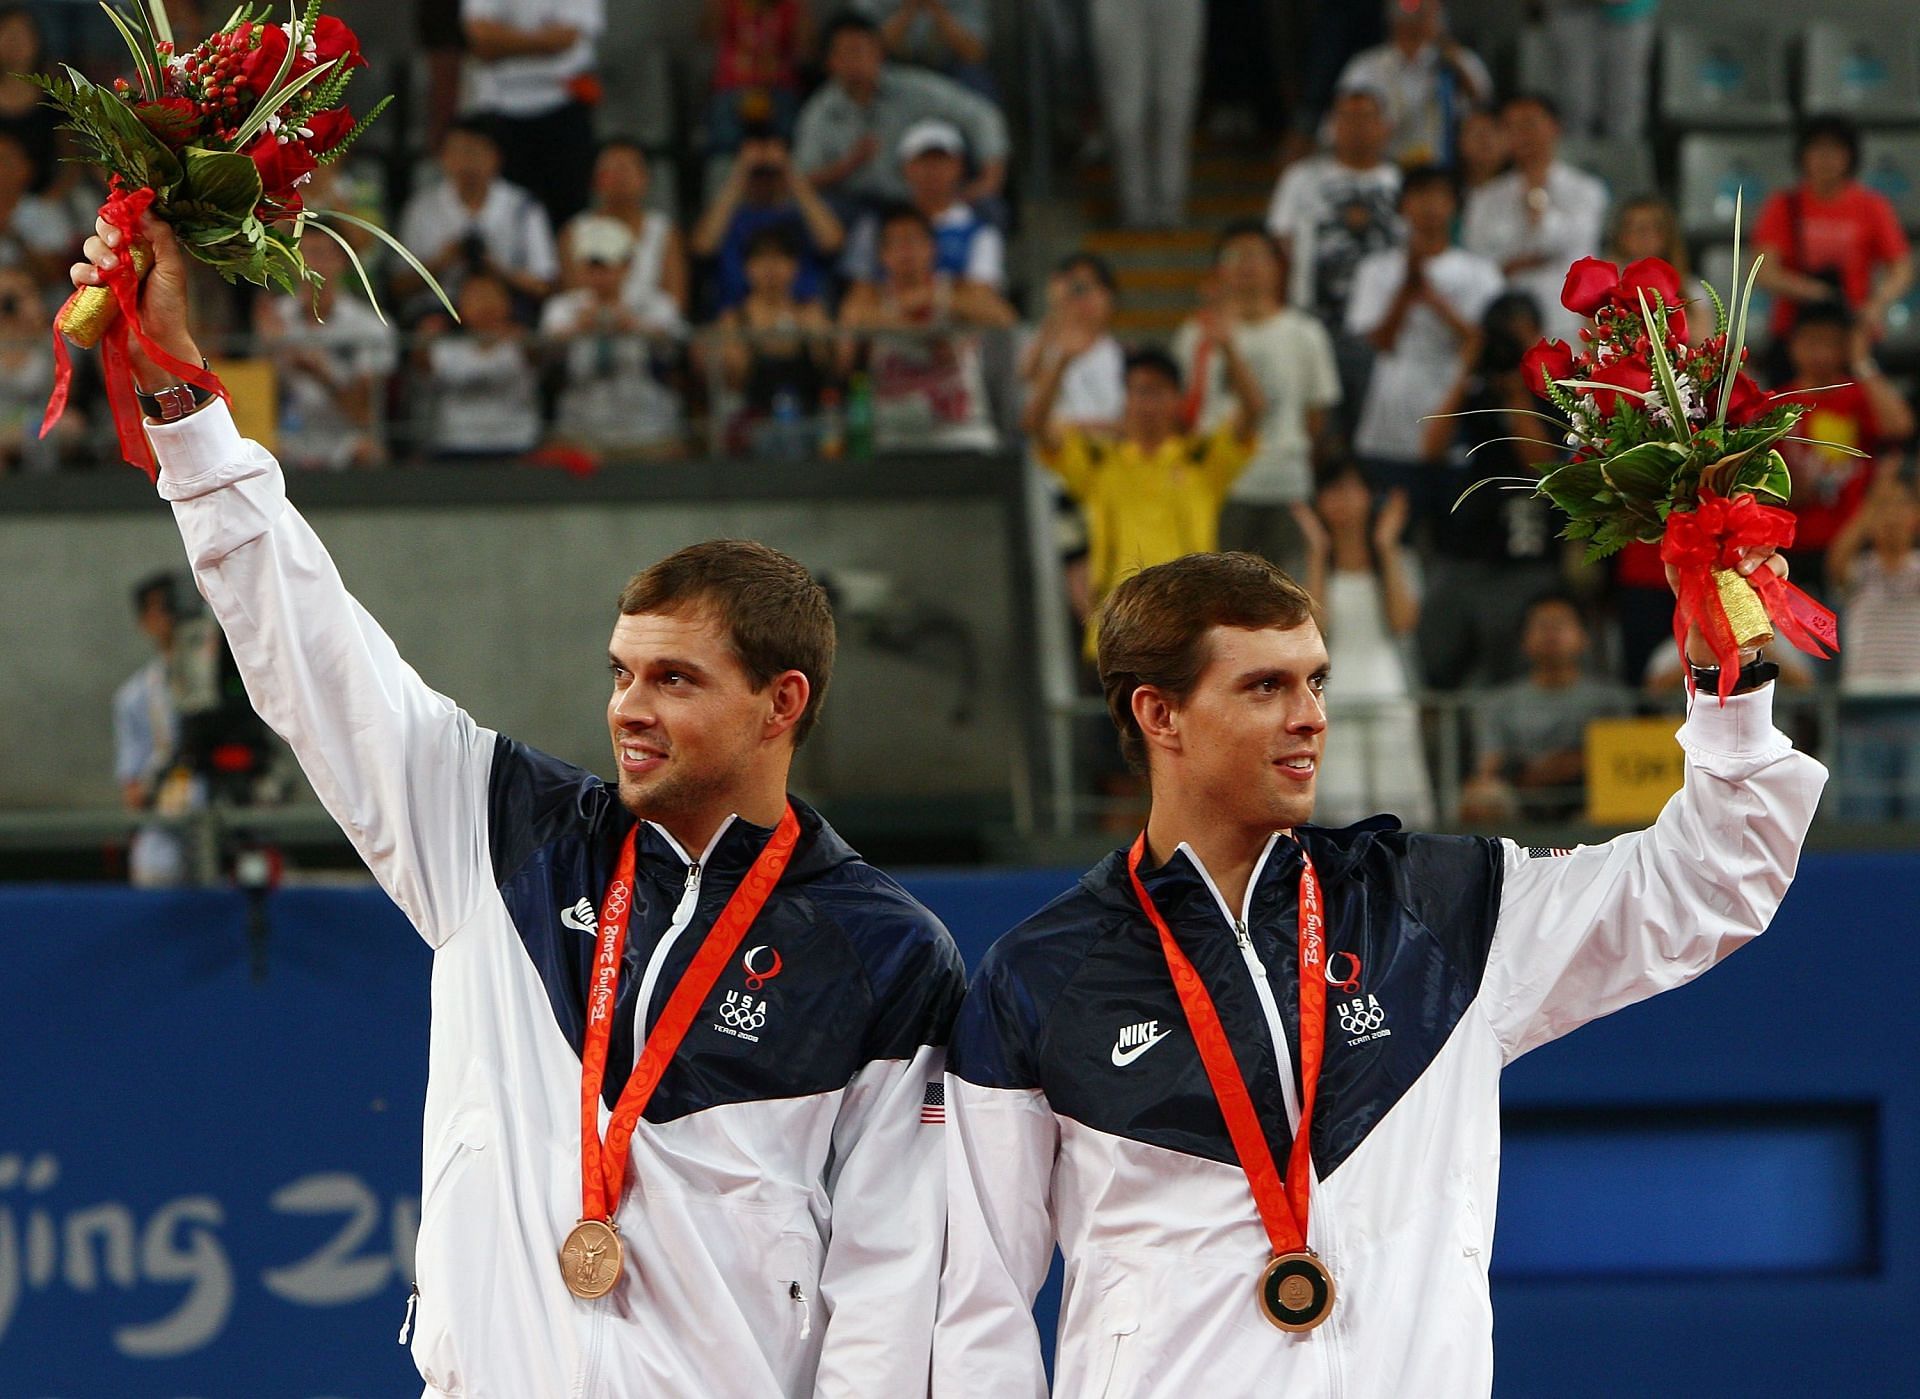 Bob Bryan (left) and Mike Bryan with their bronze medals at the 2008 Beijing Olympics